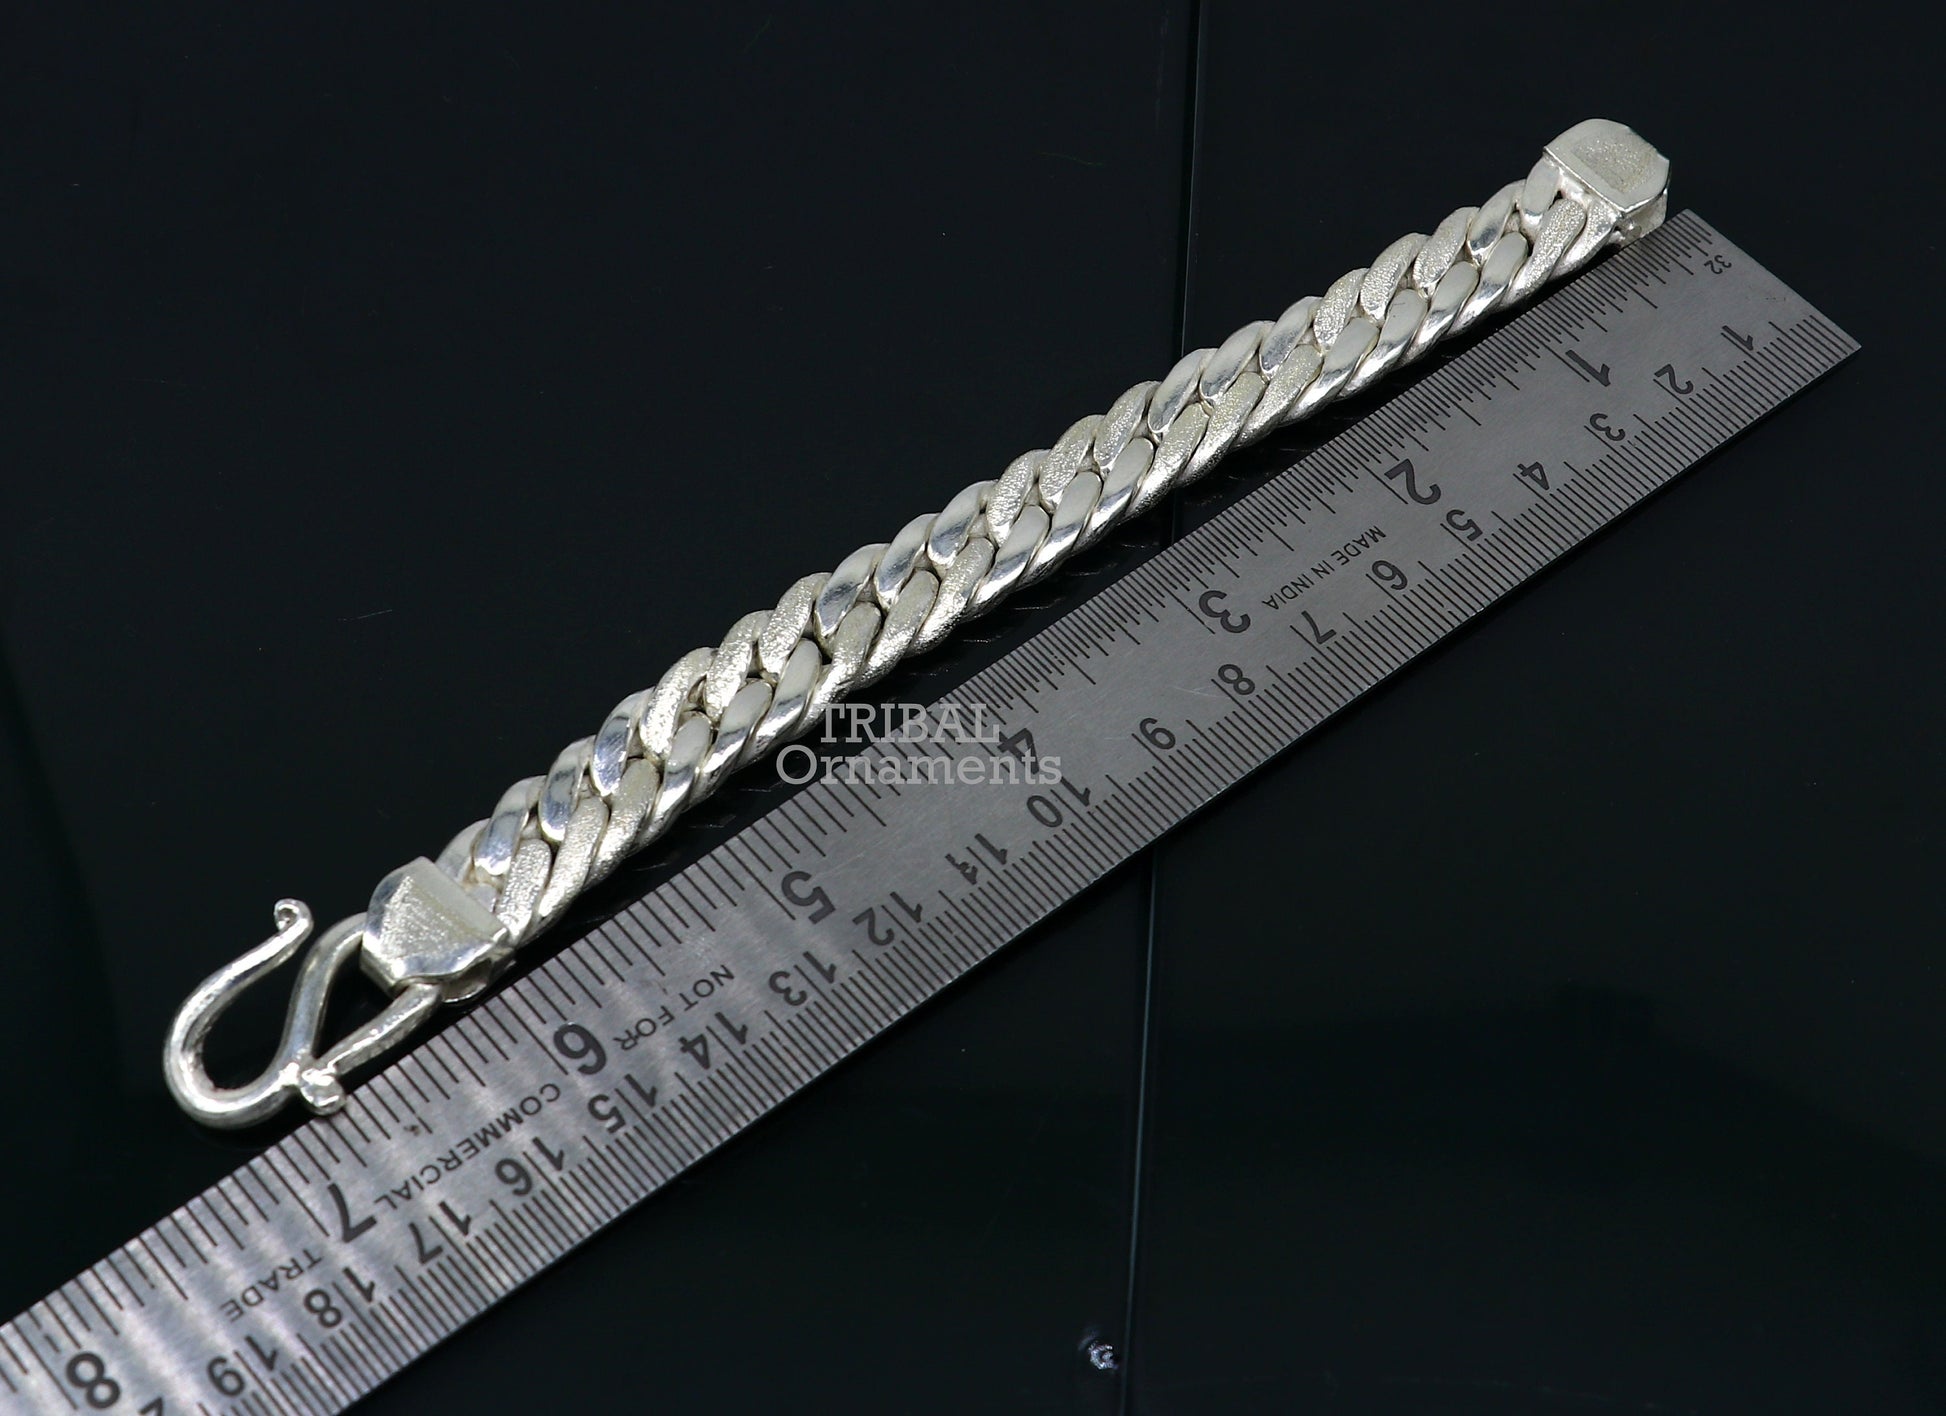 7" solid long Vintage antique Cuban link chain 925 sterling silver bracelet, excellent unisex gifting custom made jewelry from india sbr375 - TRIBAL ORNAMENTS